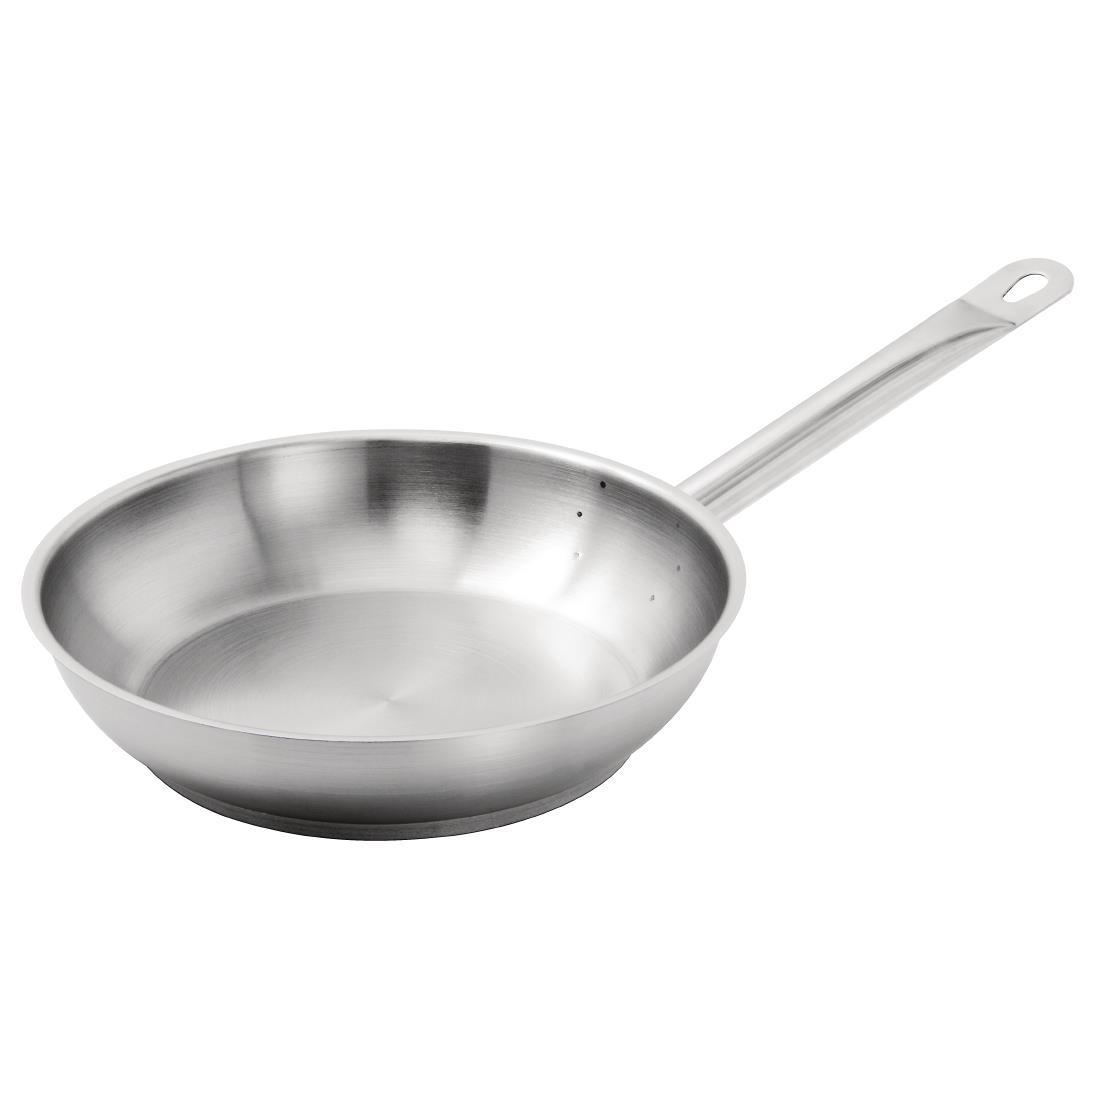 Vogue Stainless Steel Induction Frying Pan 240mm - M925  - 2